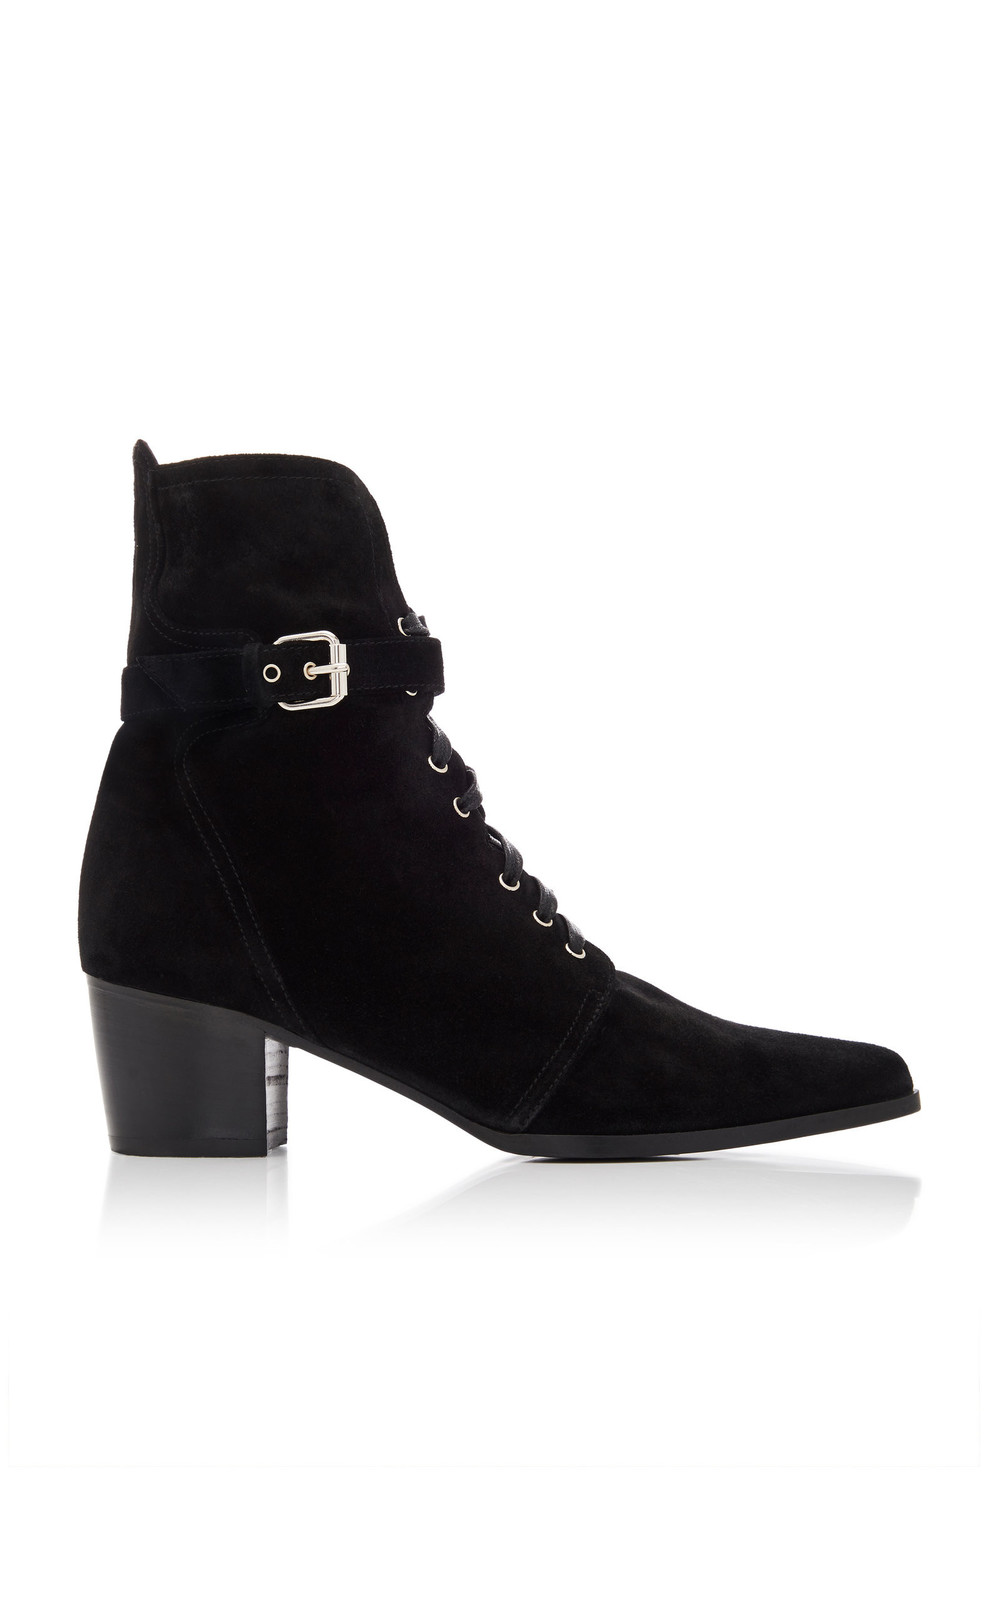 Tabitha Simmons | Phoenix buckled suede ankle boots | NET-A-PORTER.COM